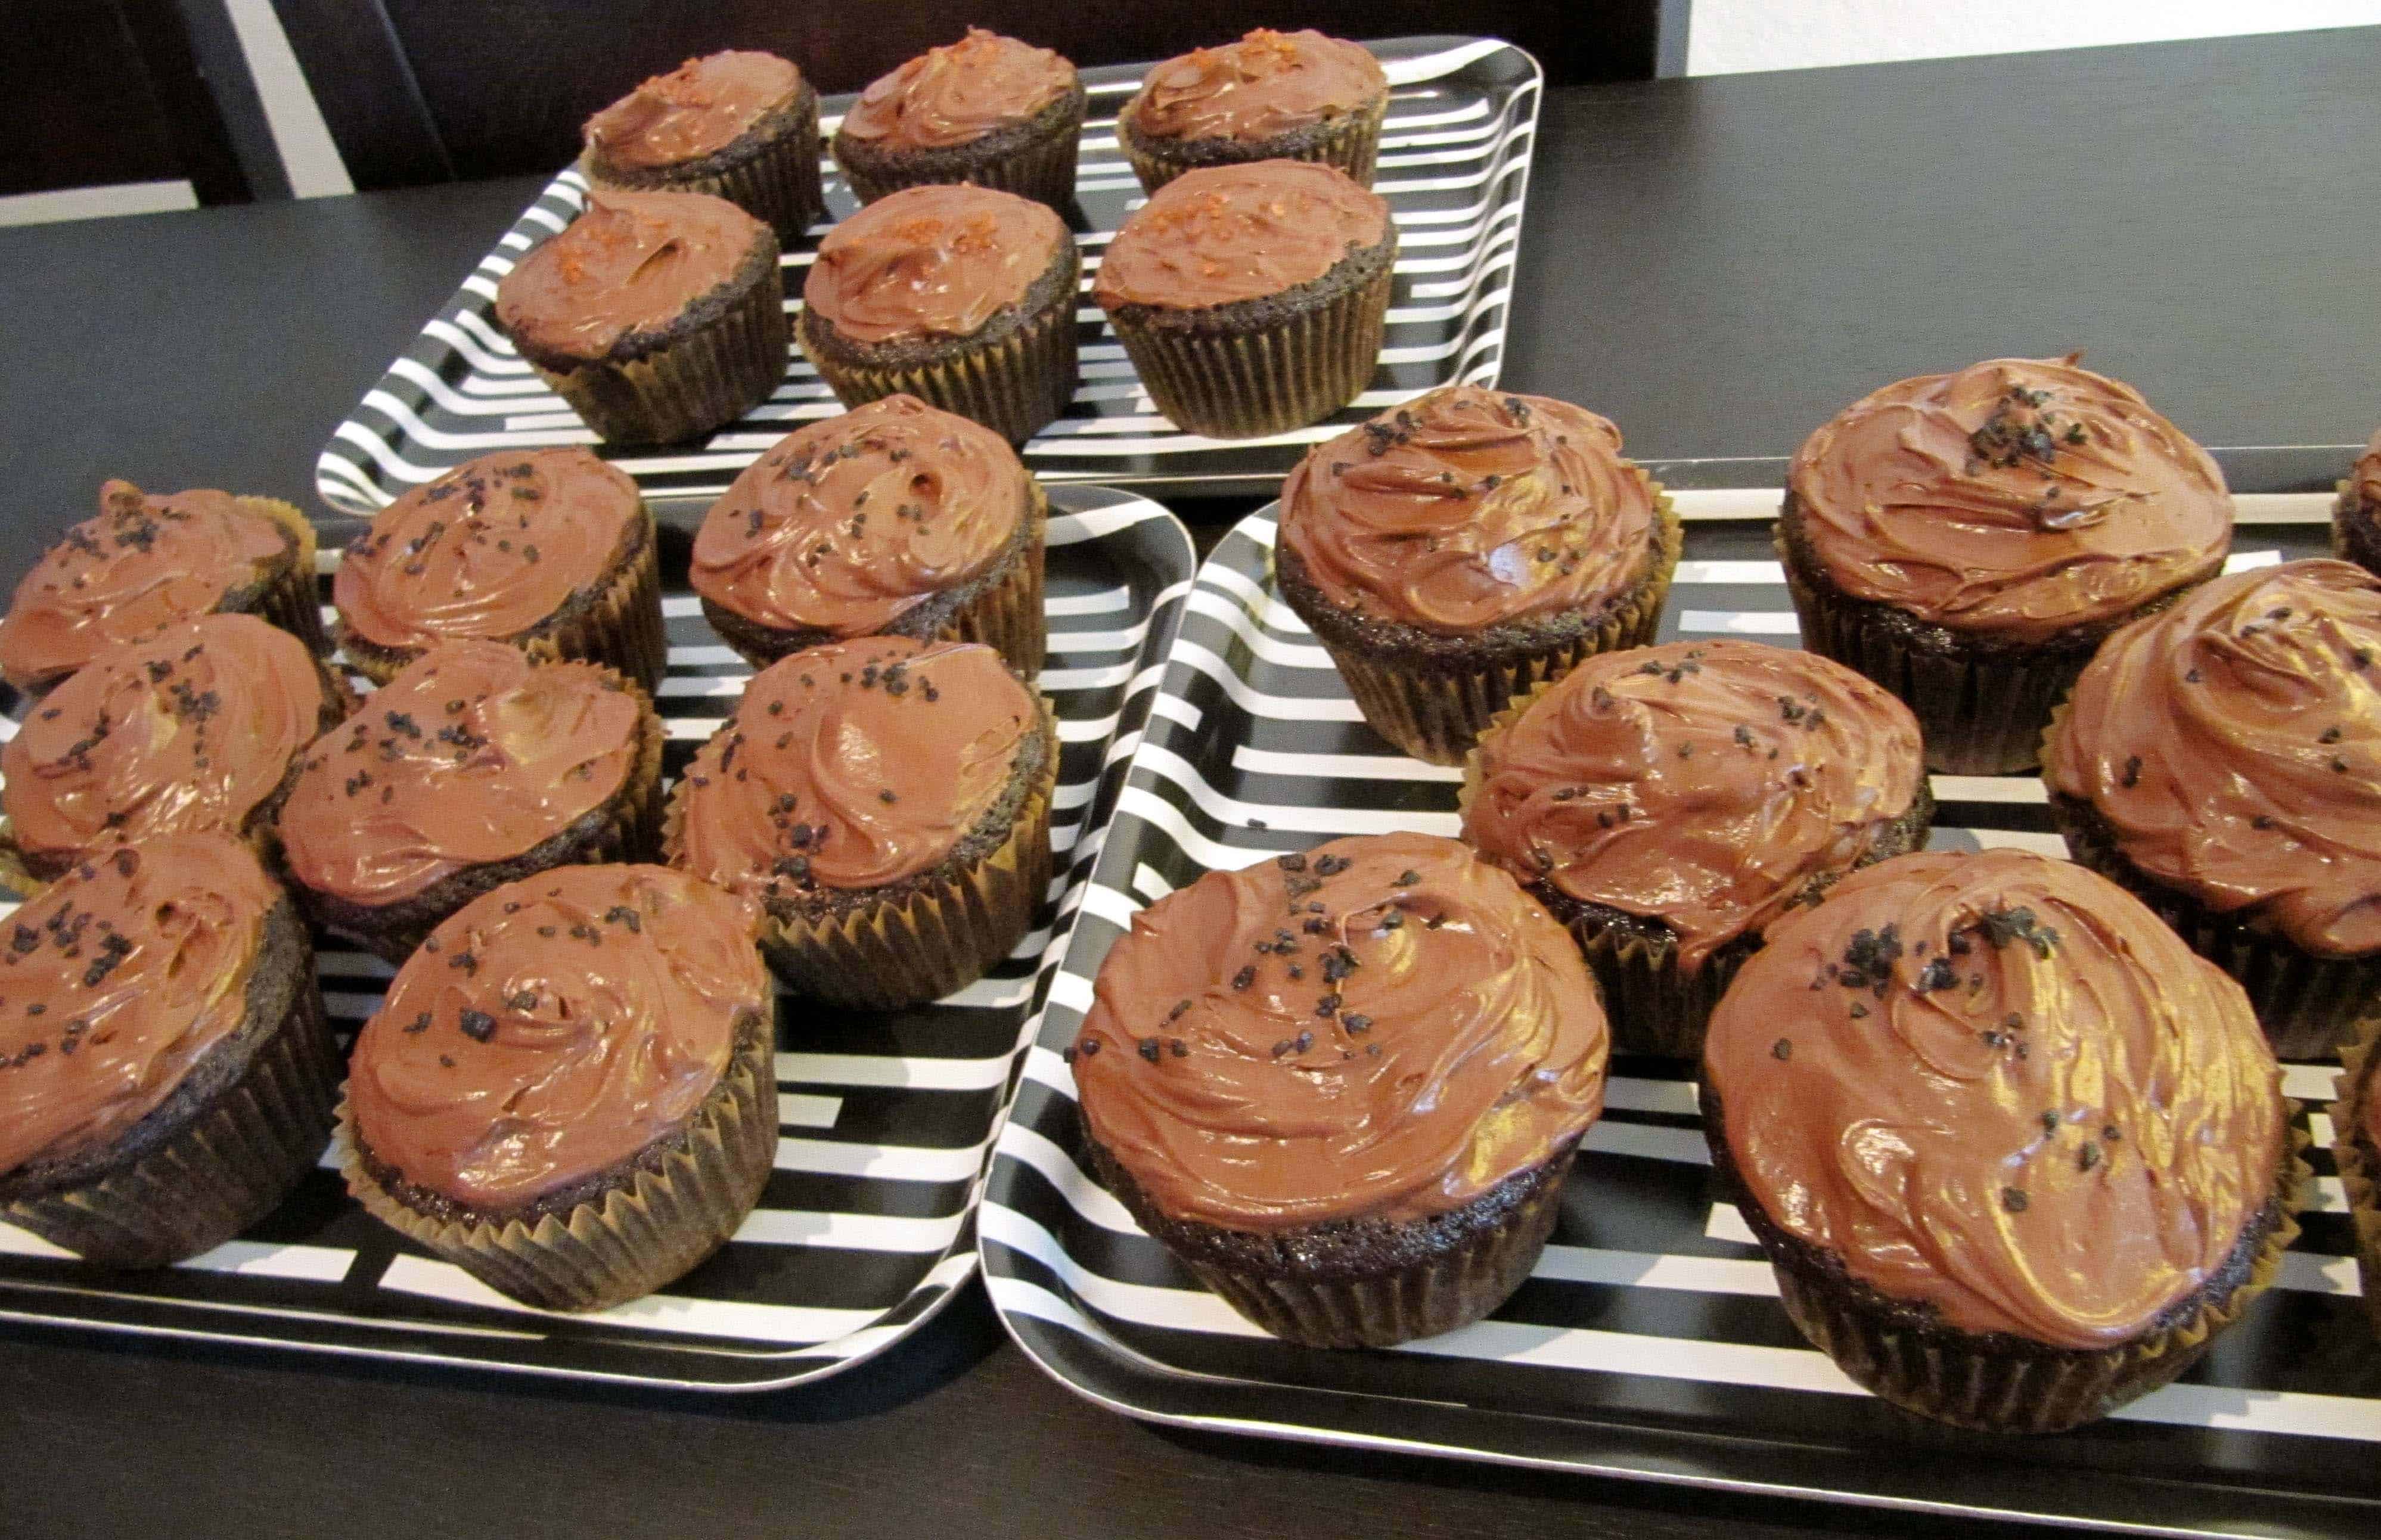 The Bacon Chocolate Cupcake Experiment